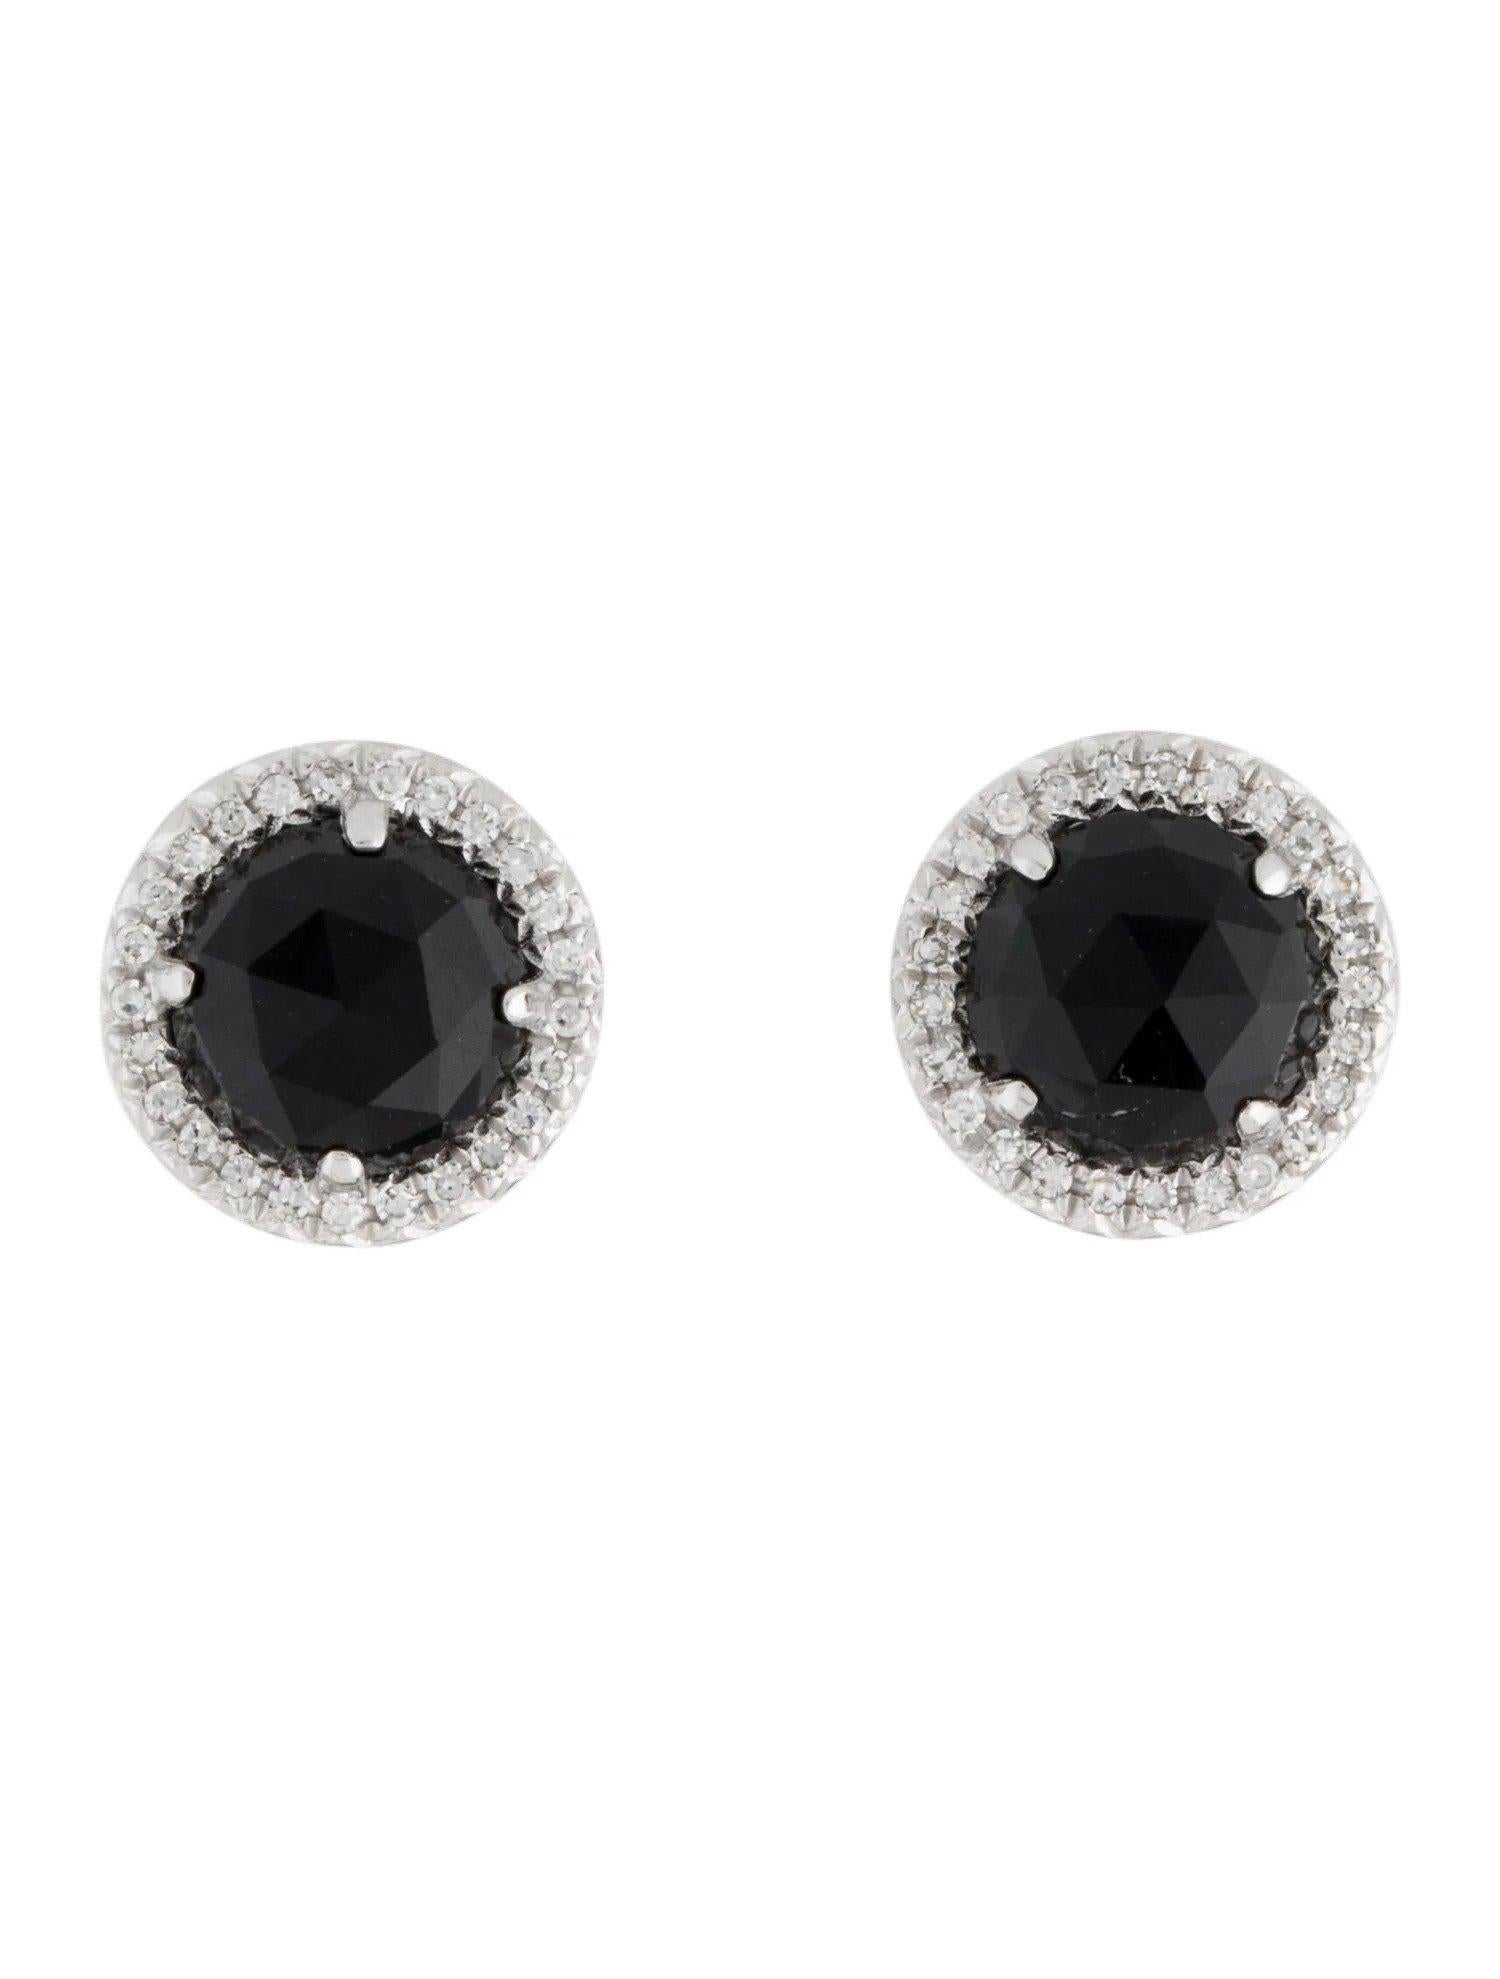 These Black Onyx & Diamond Earrings are a stunning and timeless accessory that can add a touch of glamour and sophistication to any outfit. 

These earrings each feature a 0.94 Carat Round Black Onyx , with a Diamond Halo comprised of 0.06 Carats of